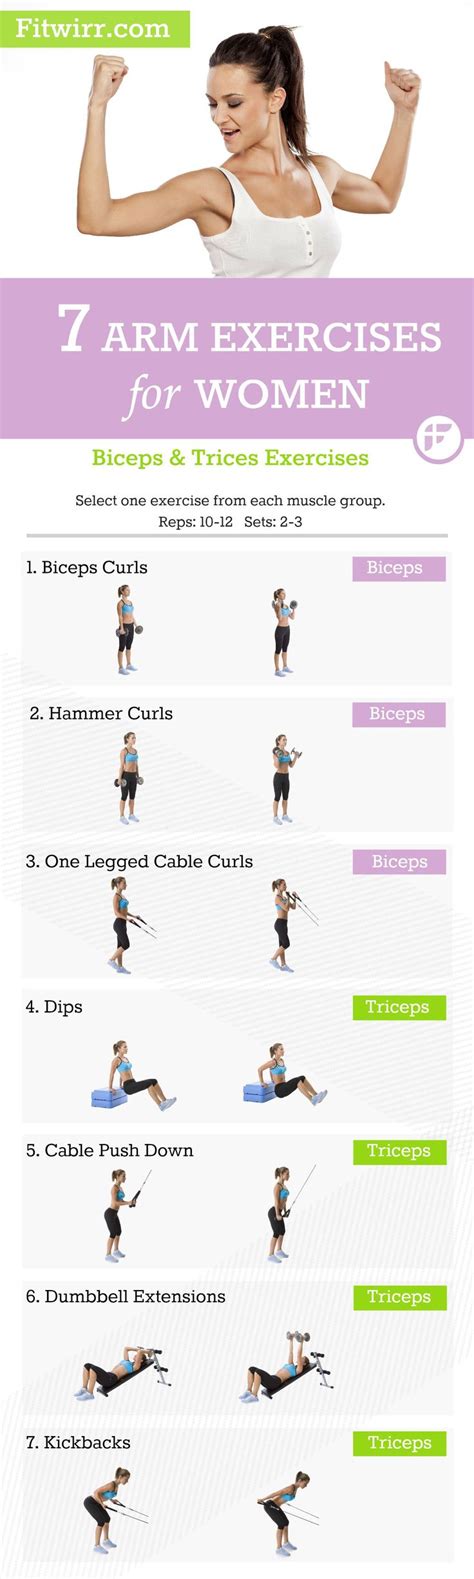 Fitness Motivation A List Of 7 Best Arm Workouts For Women To Get